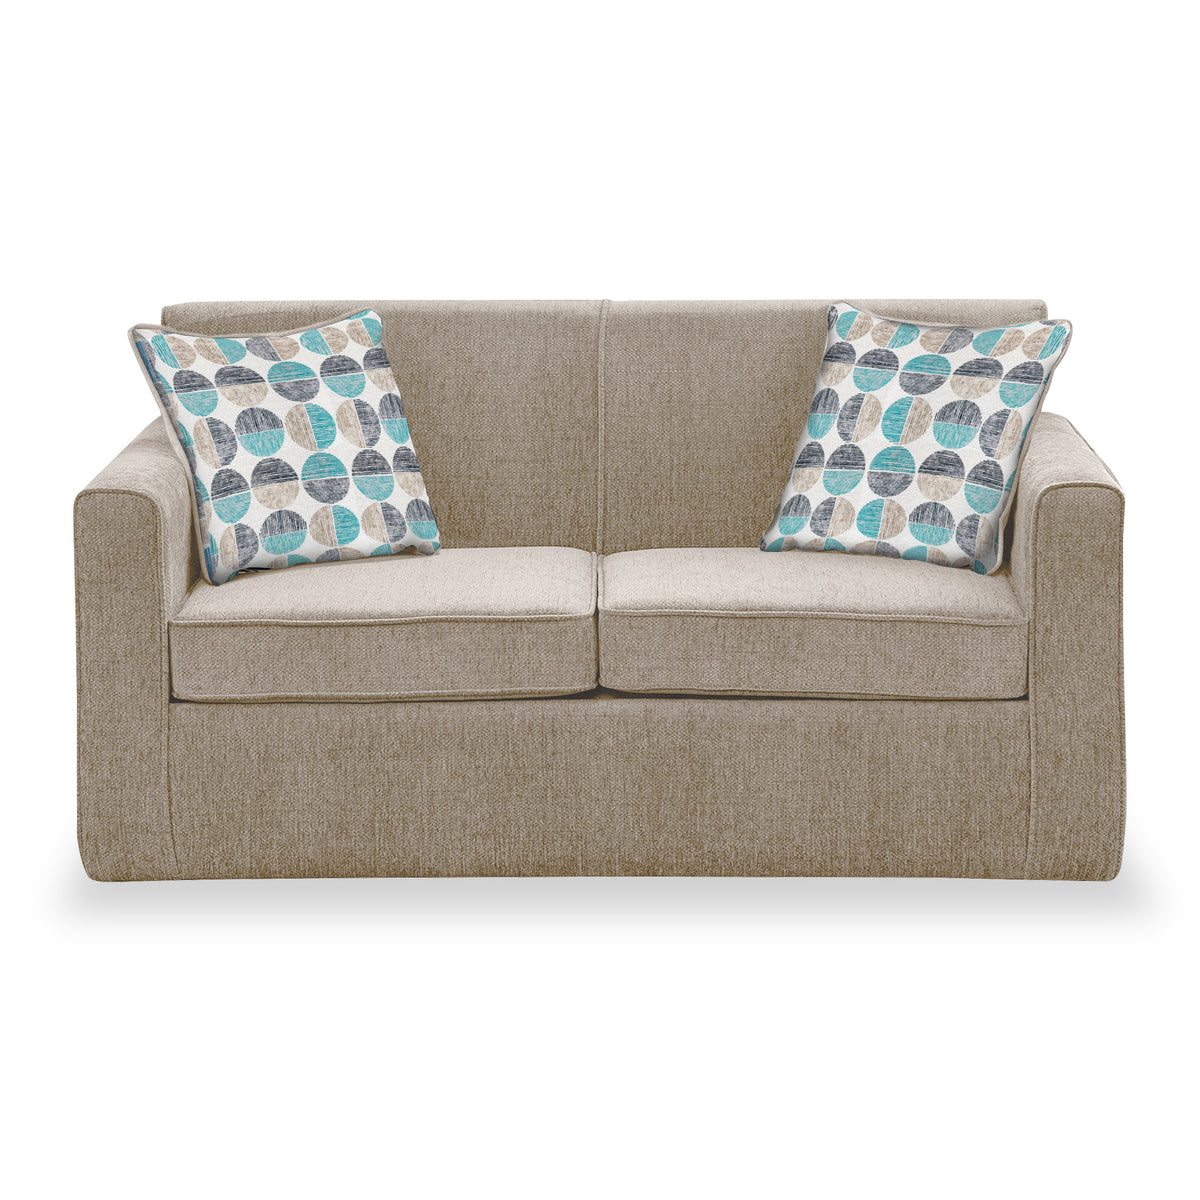 Welton Fawn Soft Weave 2 Seater Sofa Bed with Refus Duck Egg Cushions